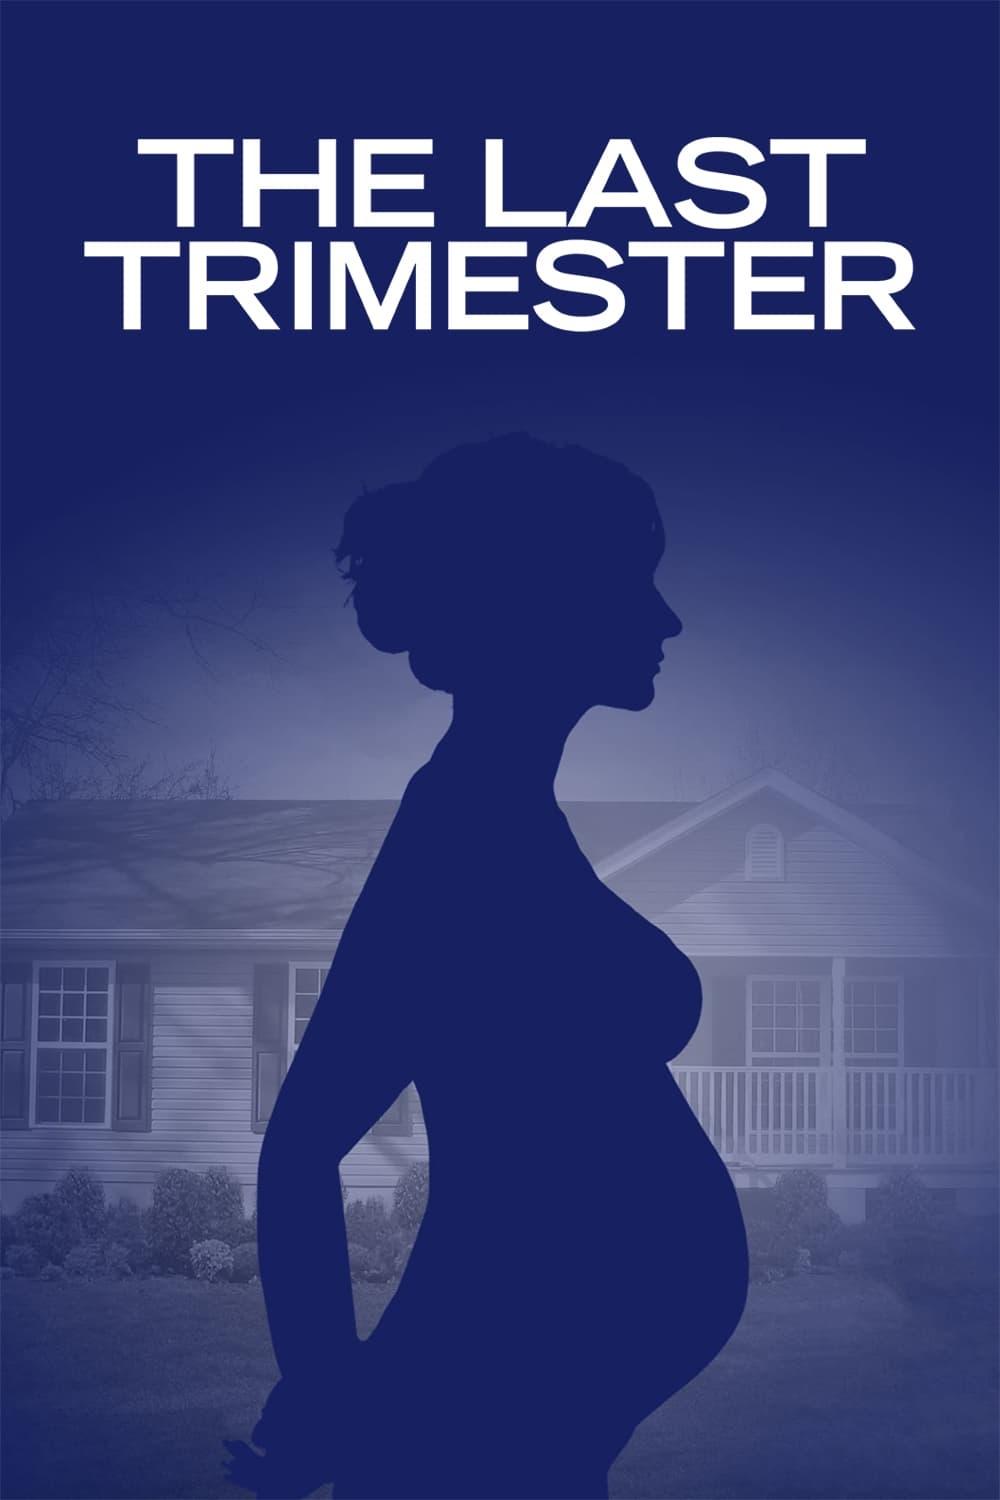 The Last Trimester poster